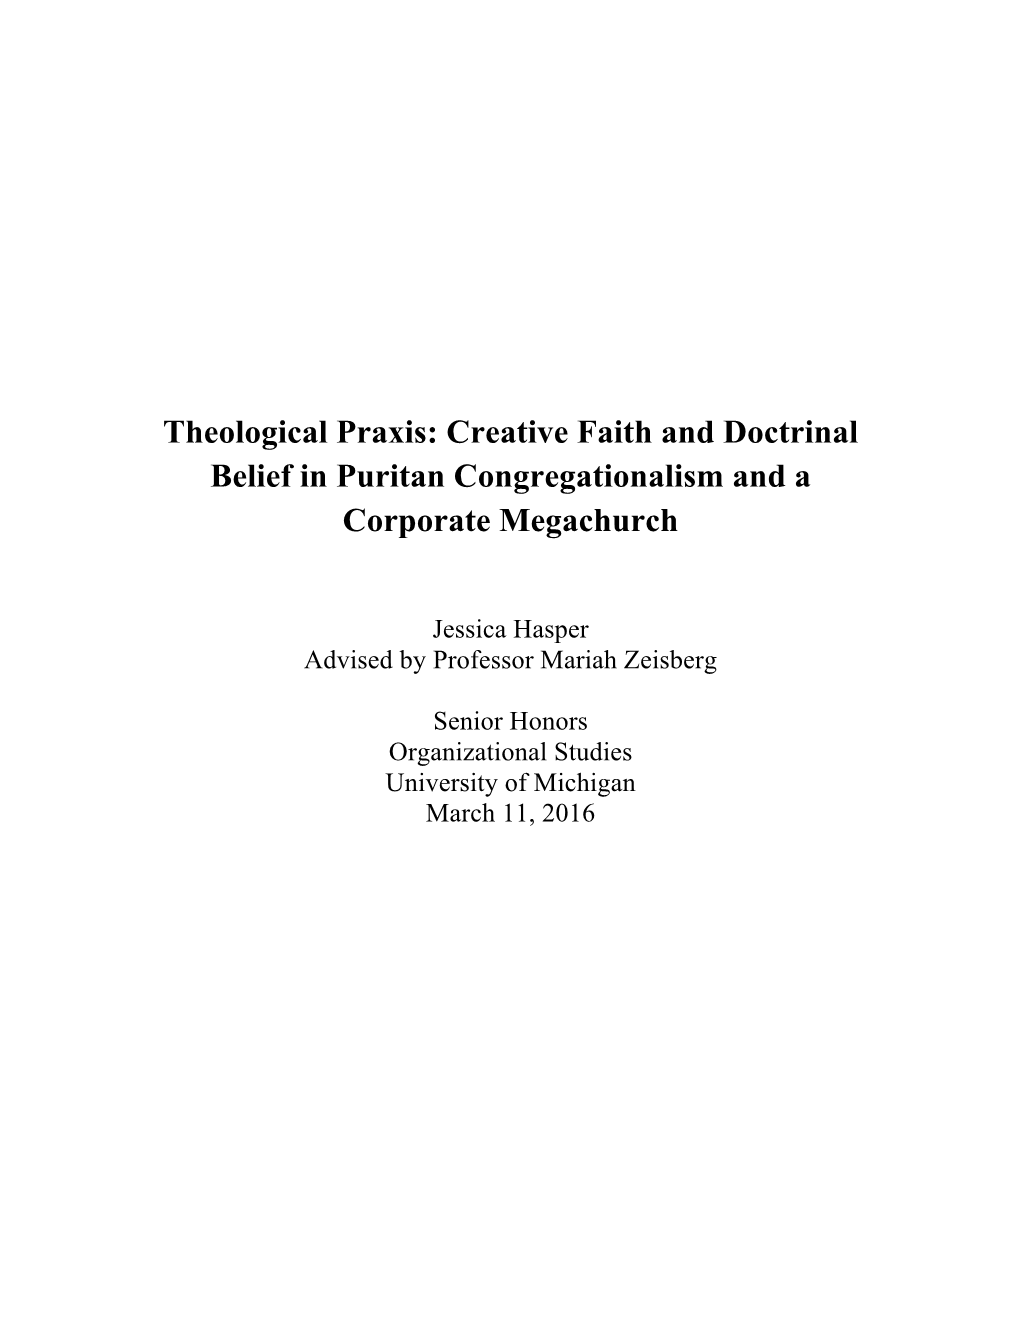 Theological Praxis: Creative Faith and Doctrinal Belief in Puritan Congregationalism and a Corporate Megachurch